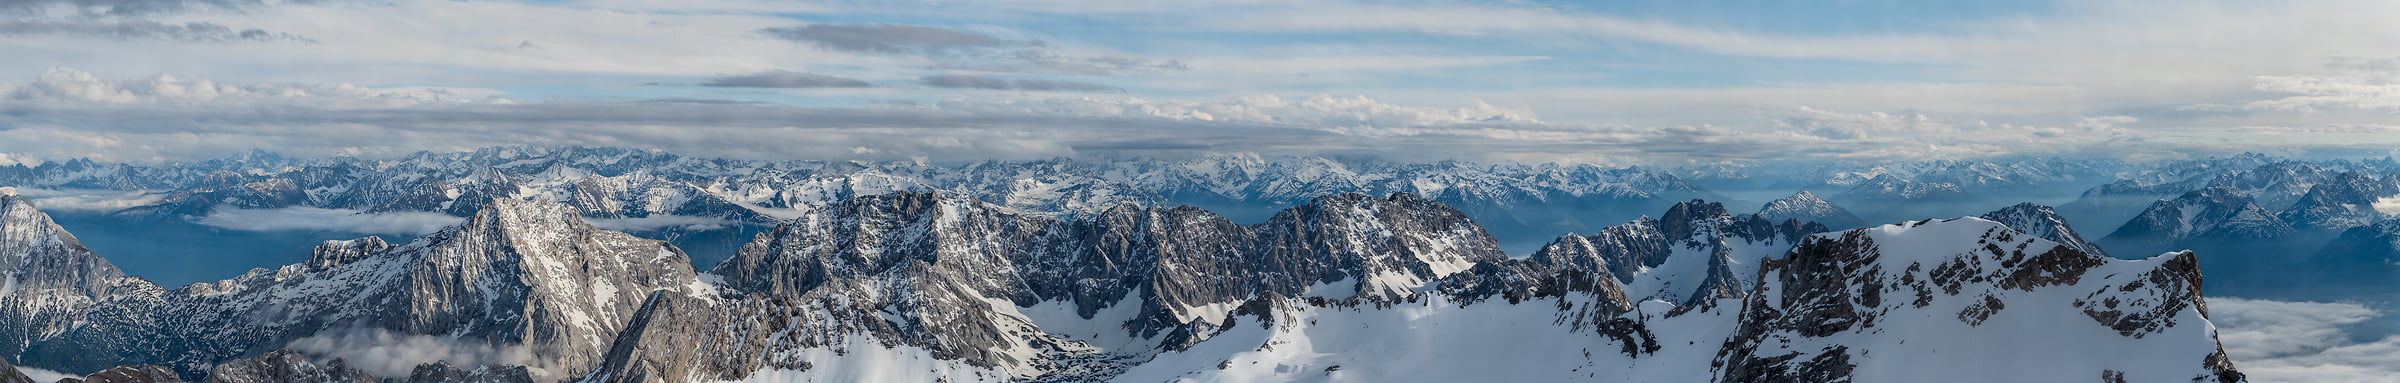 685 megapixels! A very high resolution, large-format VAST photo print of an alpine landscape with snowy mountains; panorama photograph created by Alfred Feil in Zugspitze, Germany